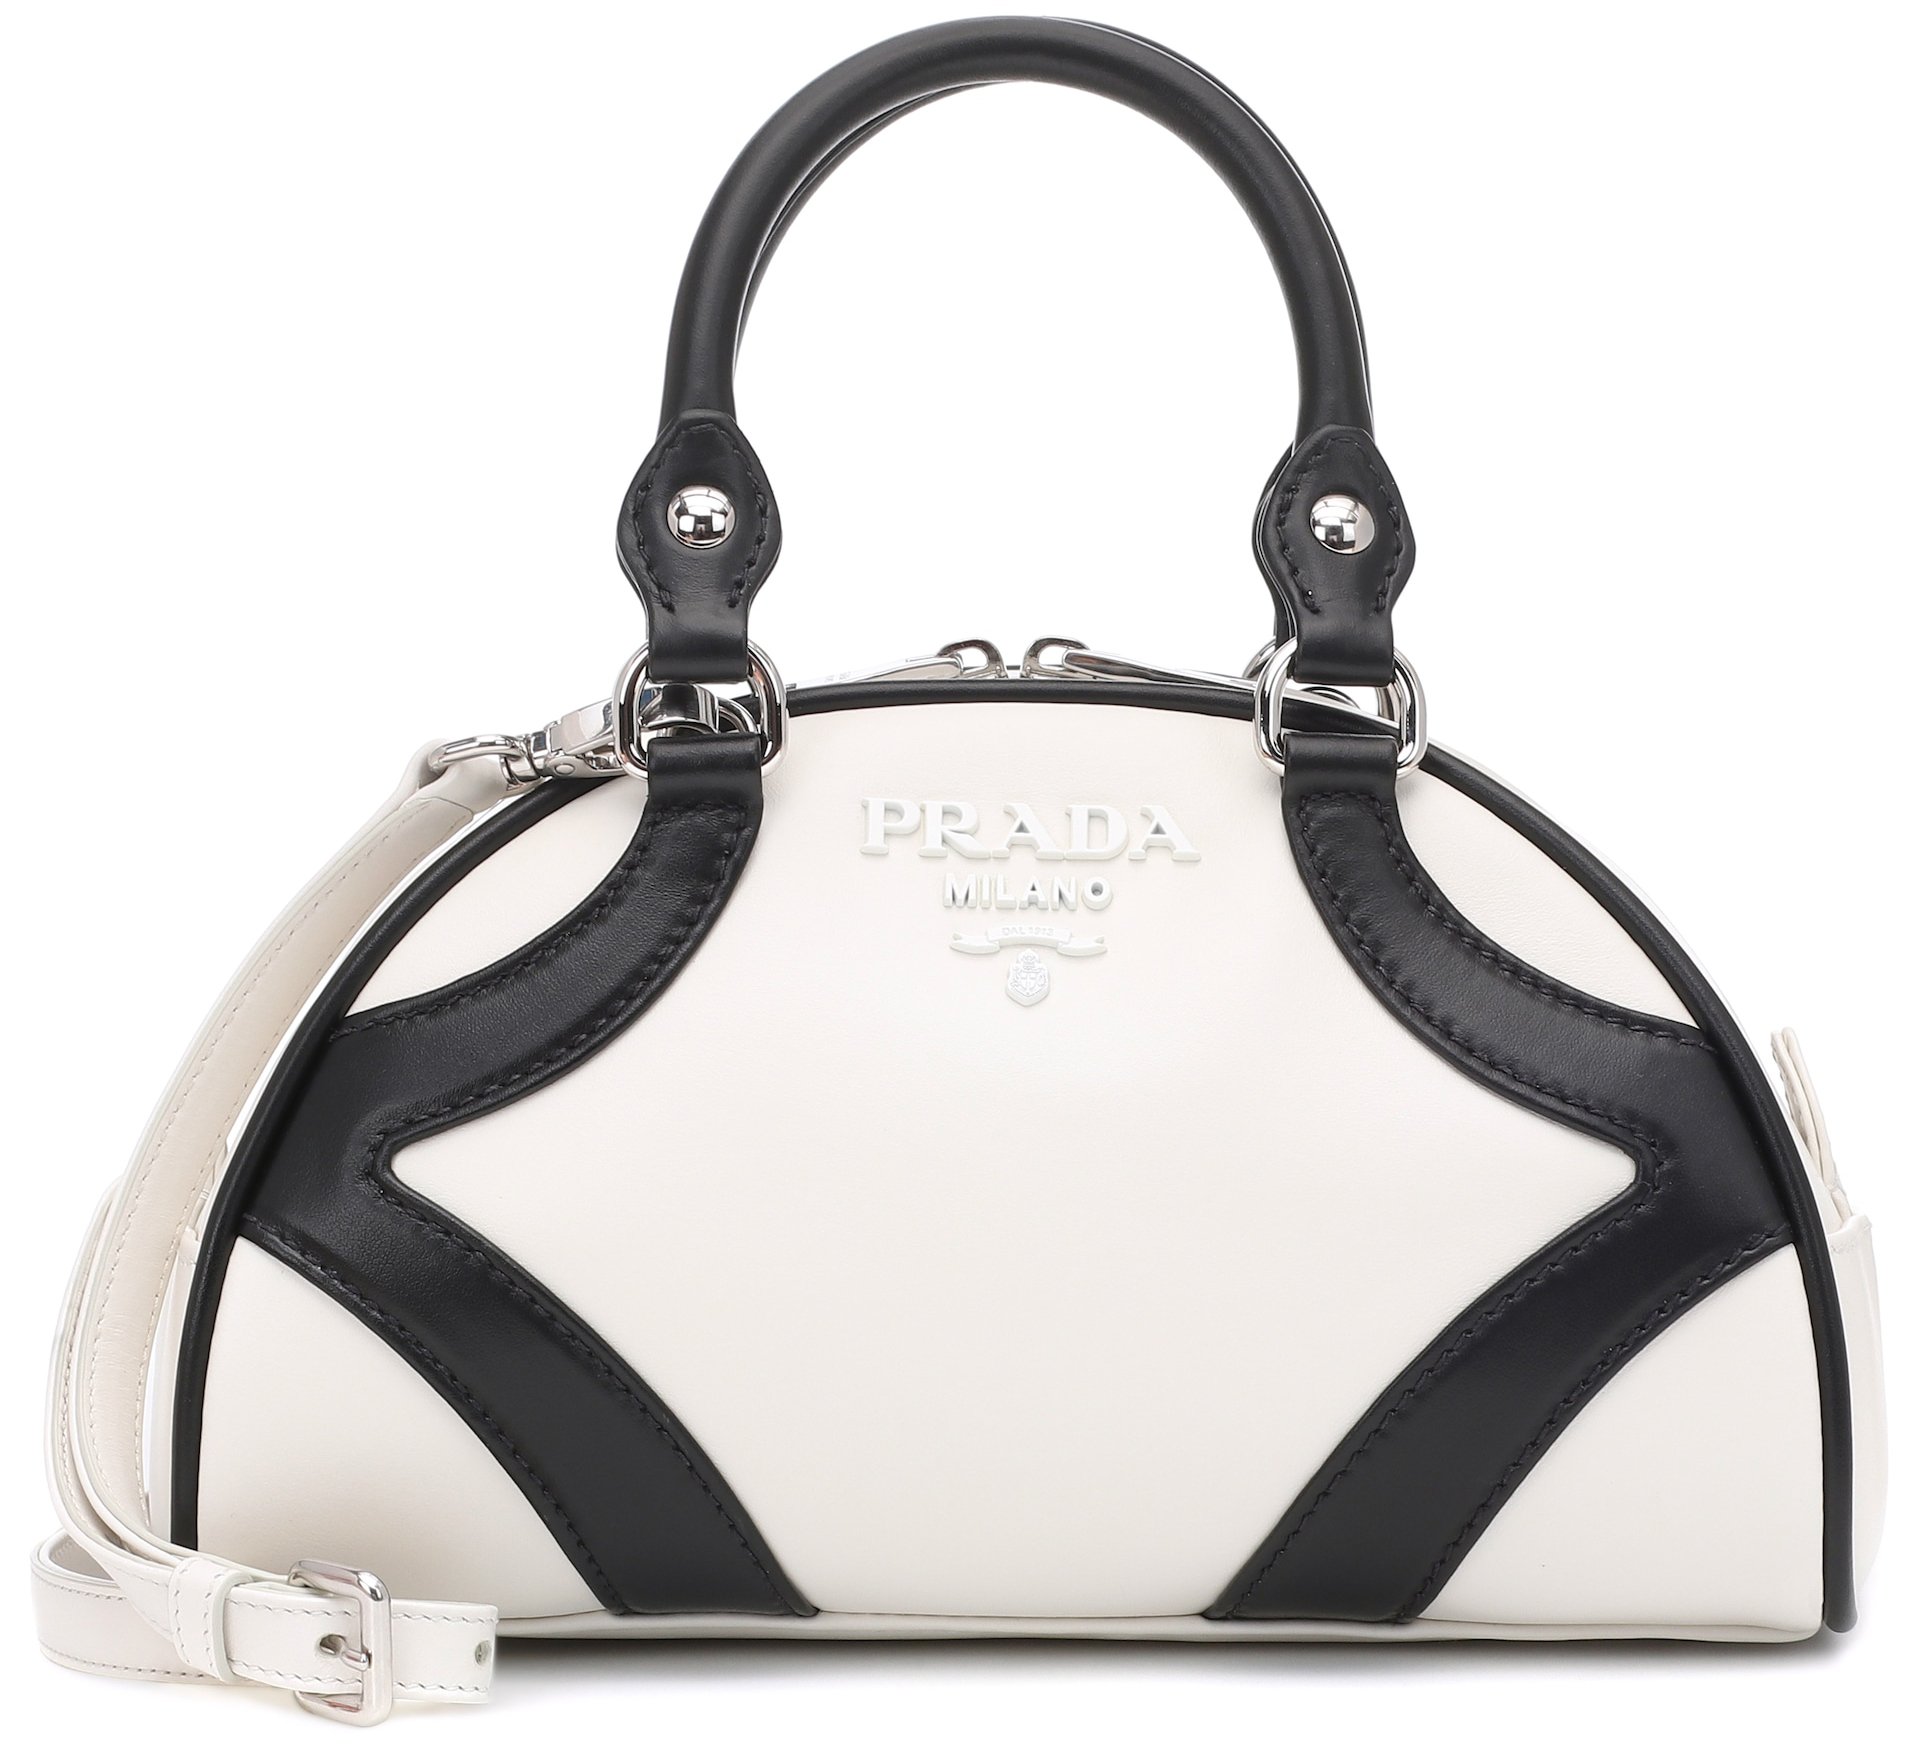 A retro-chic compact bag, the Prada Bowling bag is made in Italy from white leather with contrasting black trim